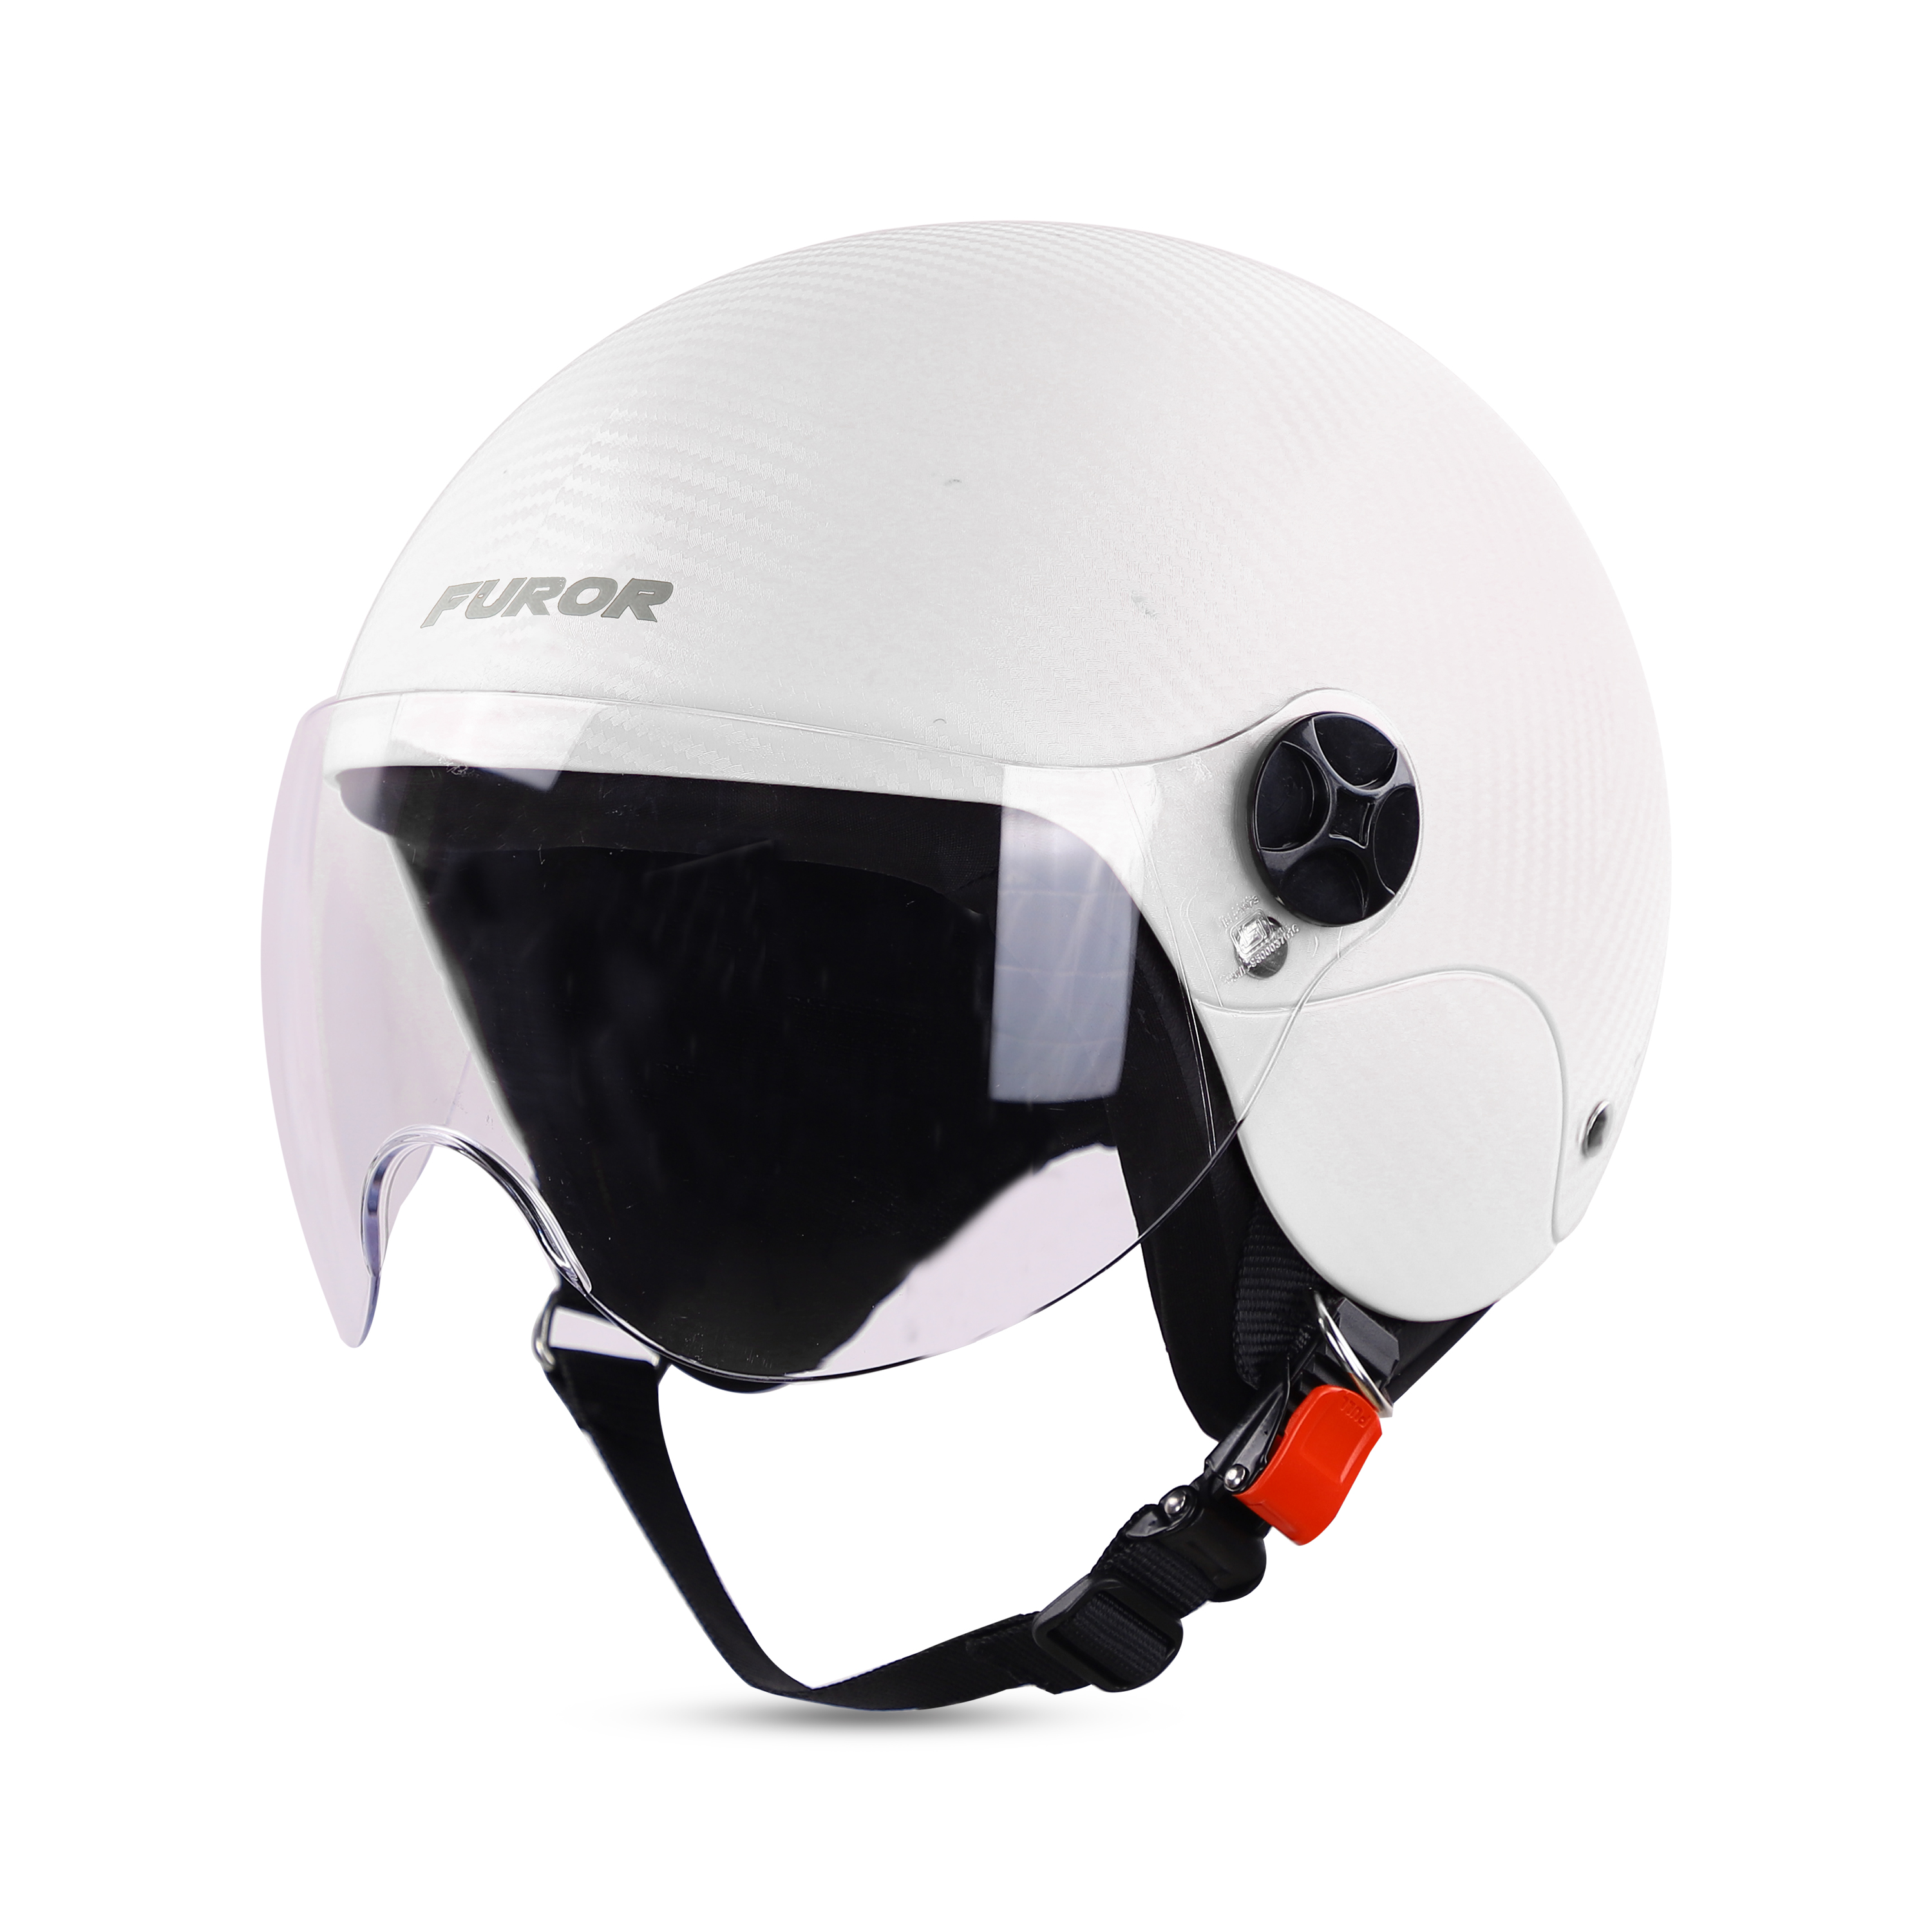 Steelbird SBH-16 Furor ISI Certified Open Face Helmet (Dashing White With Clear Visor)